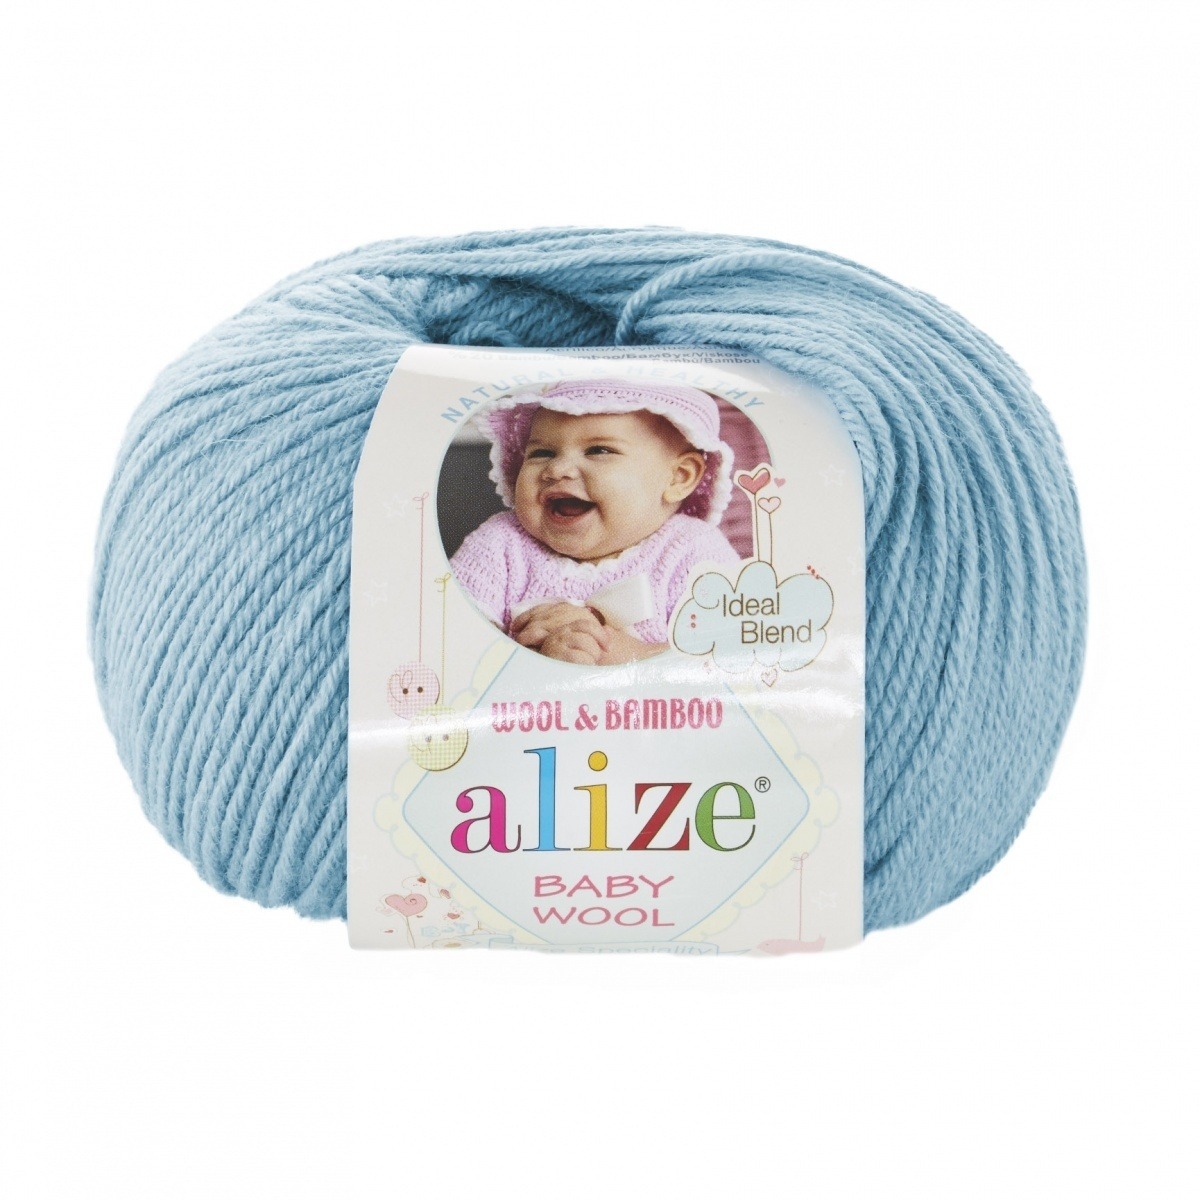 Alize "Baby wool" (128)